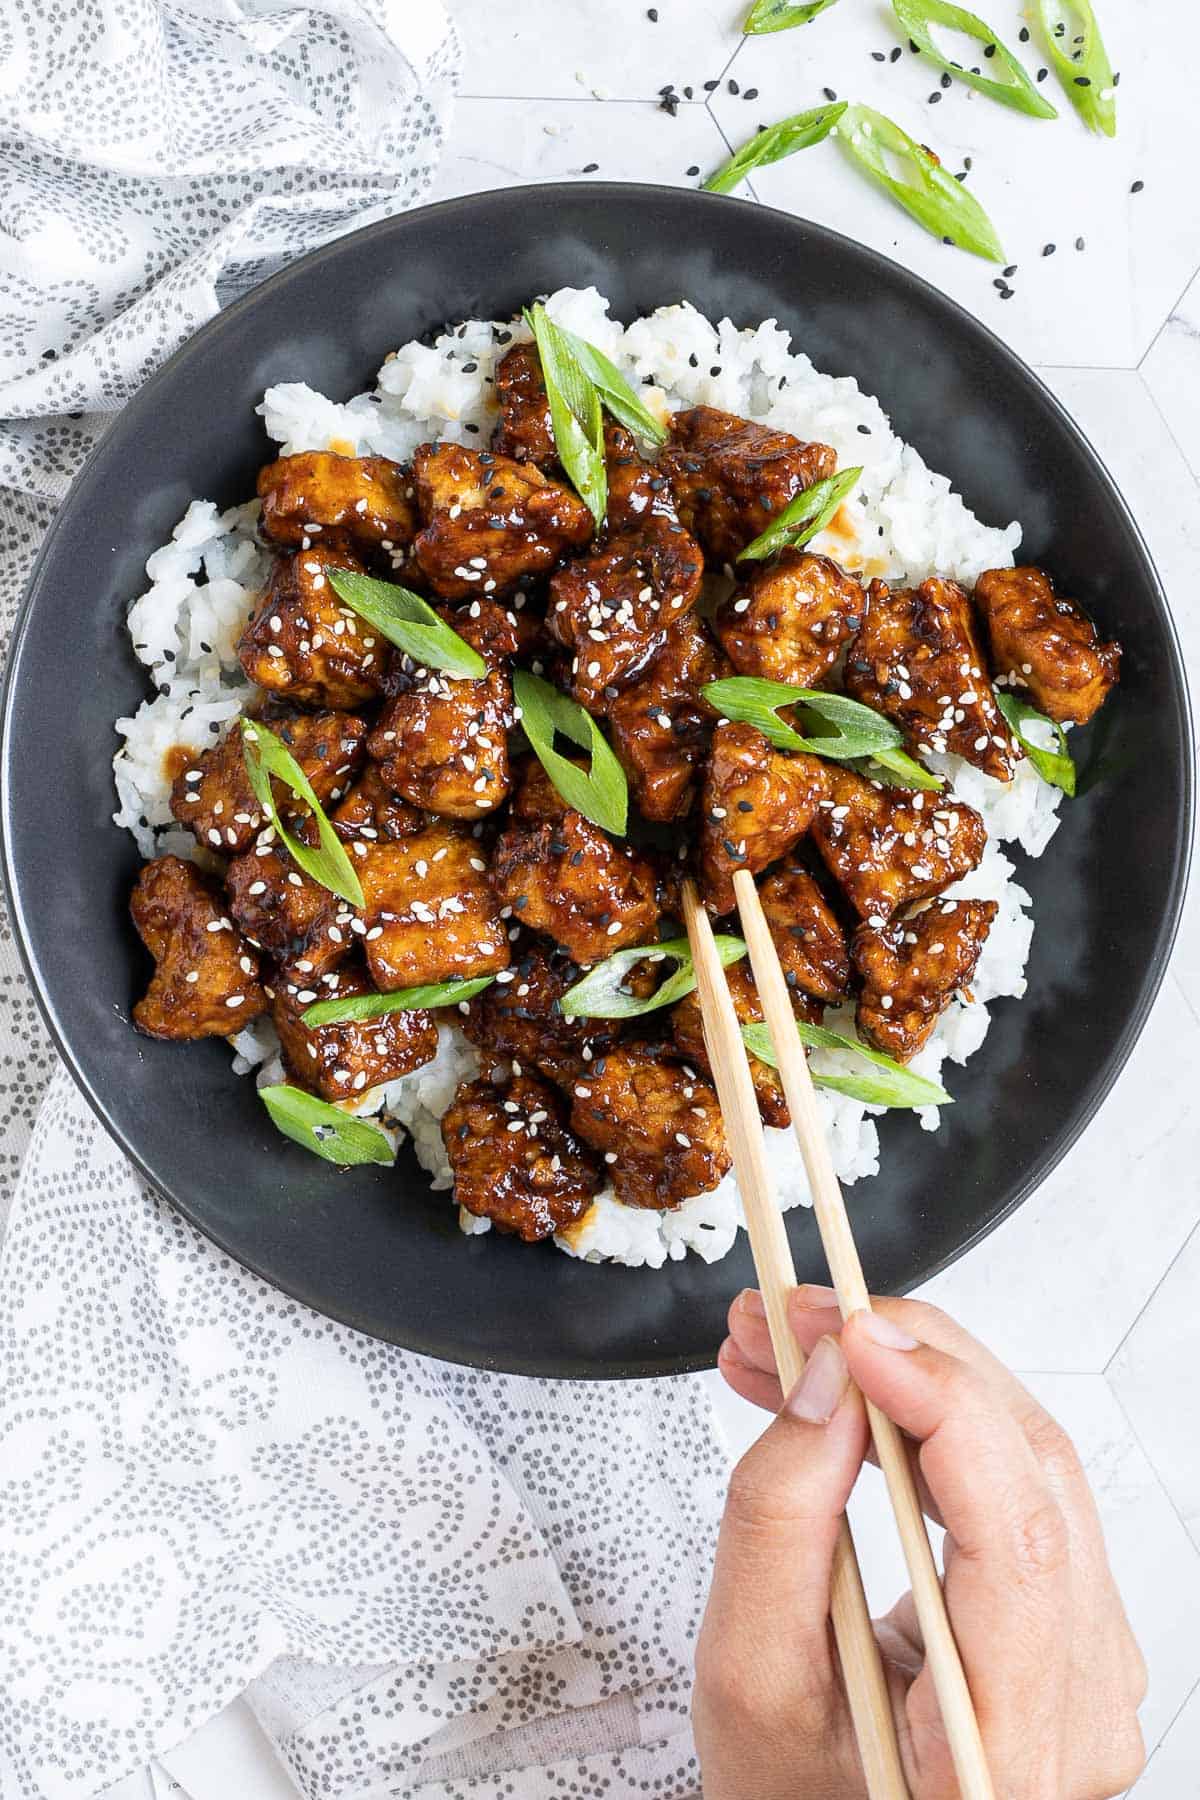 Brown sticky tofu pieces served on top of white rice on a black plate. It is sprinkled with black and white sesame seeds and scallion. A hand is holding chopsticks and about to take one. 
